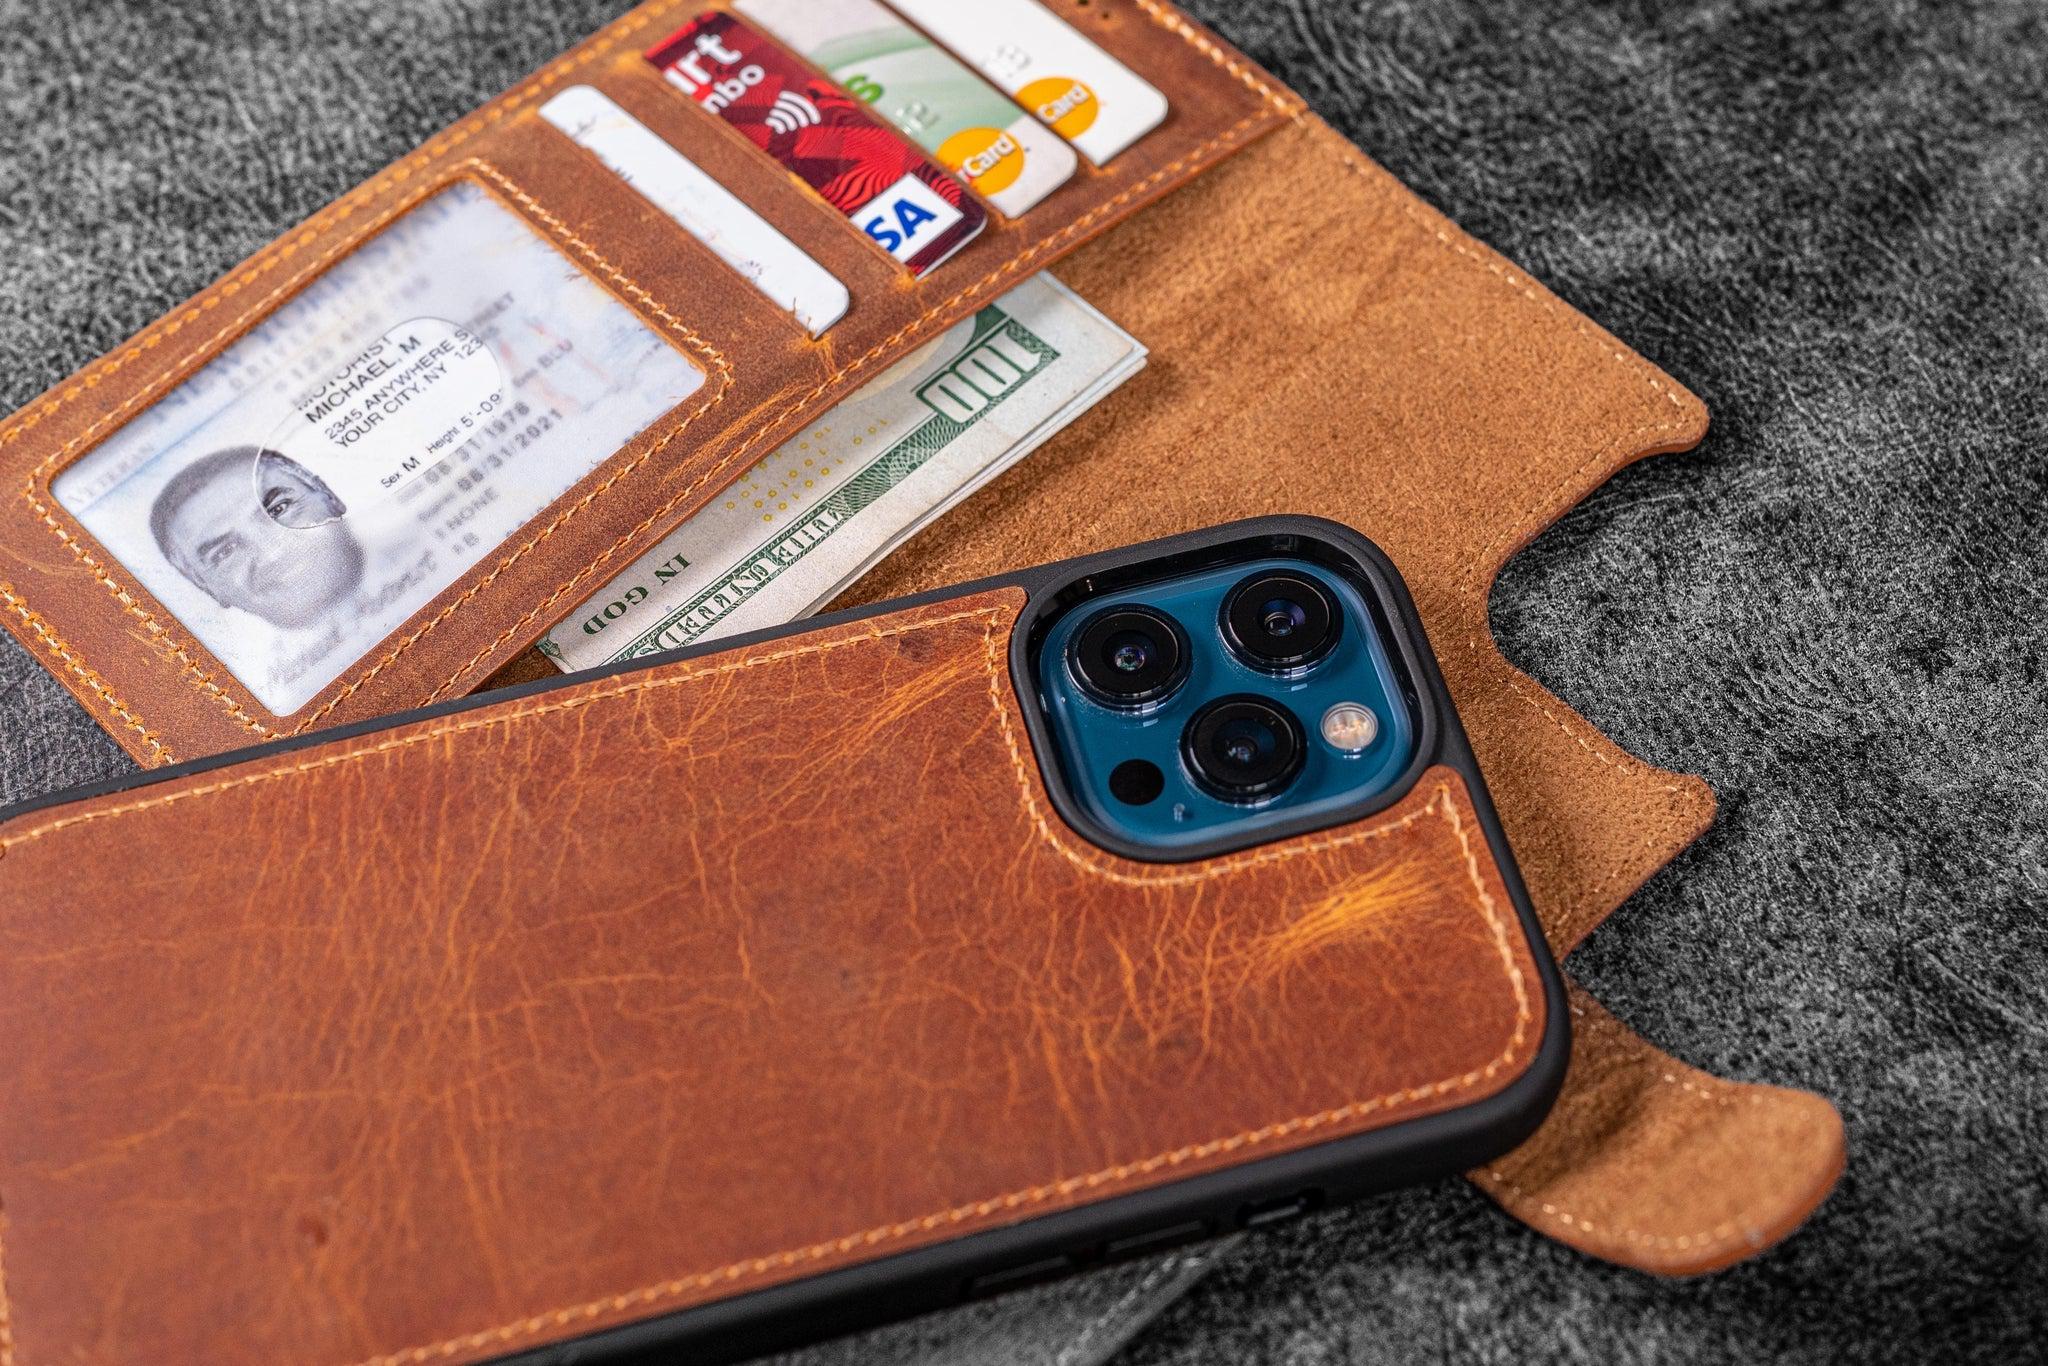 Small Letters Leather Card Slot Case iPhone XR XS XS Max